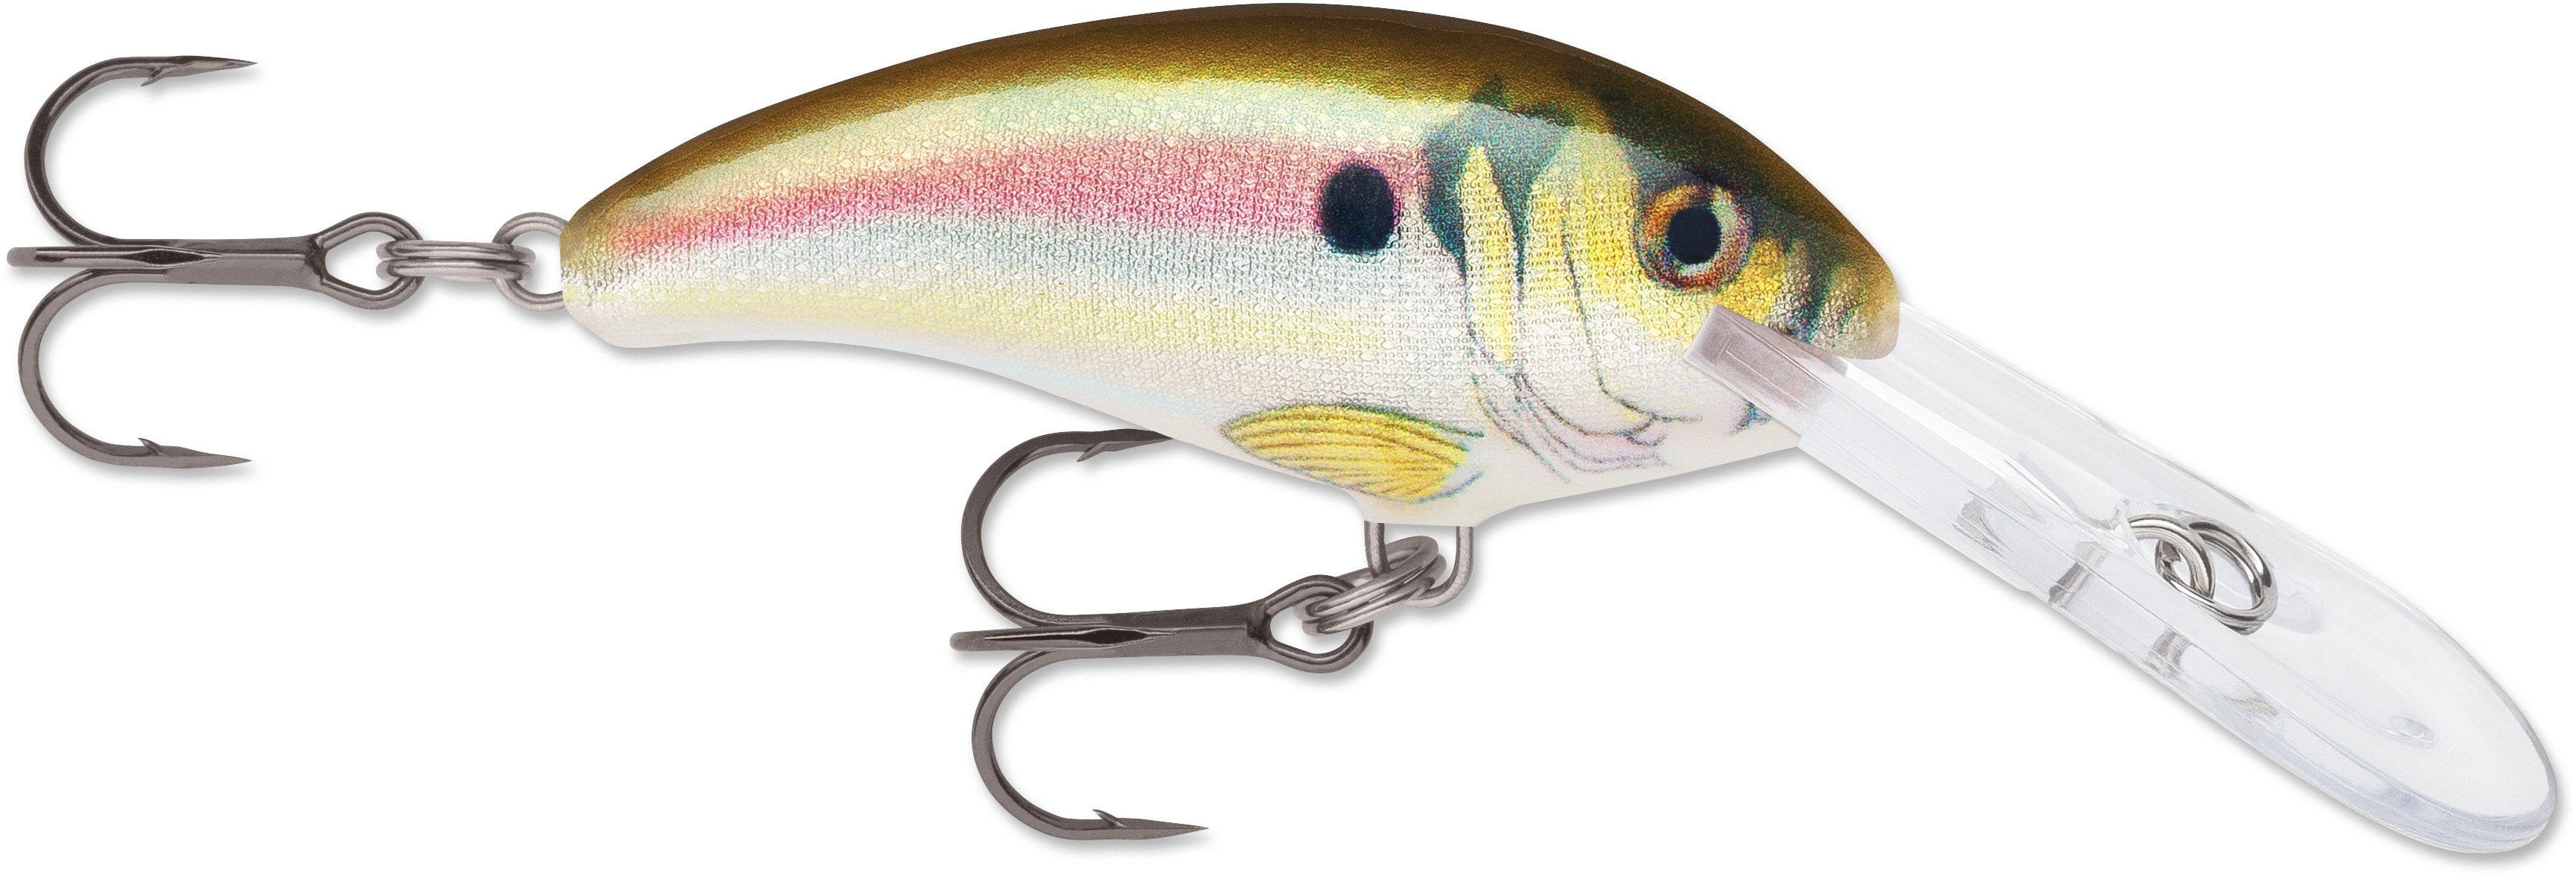 Bass Assassin CSA35550 Curly Shad Halloween 2" Soft Plastic Fishing Lure for sale online 